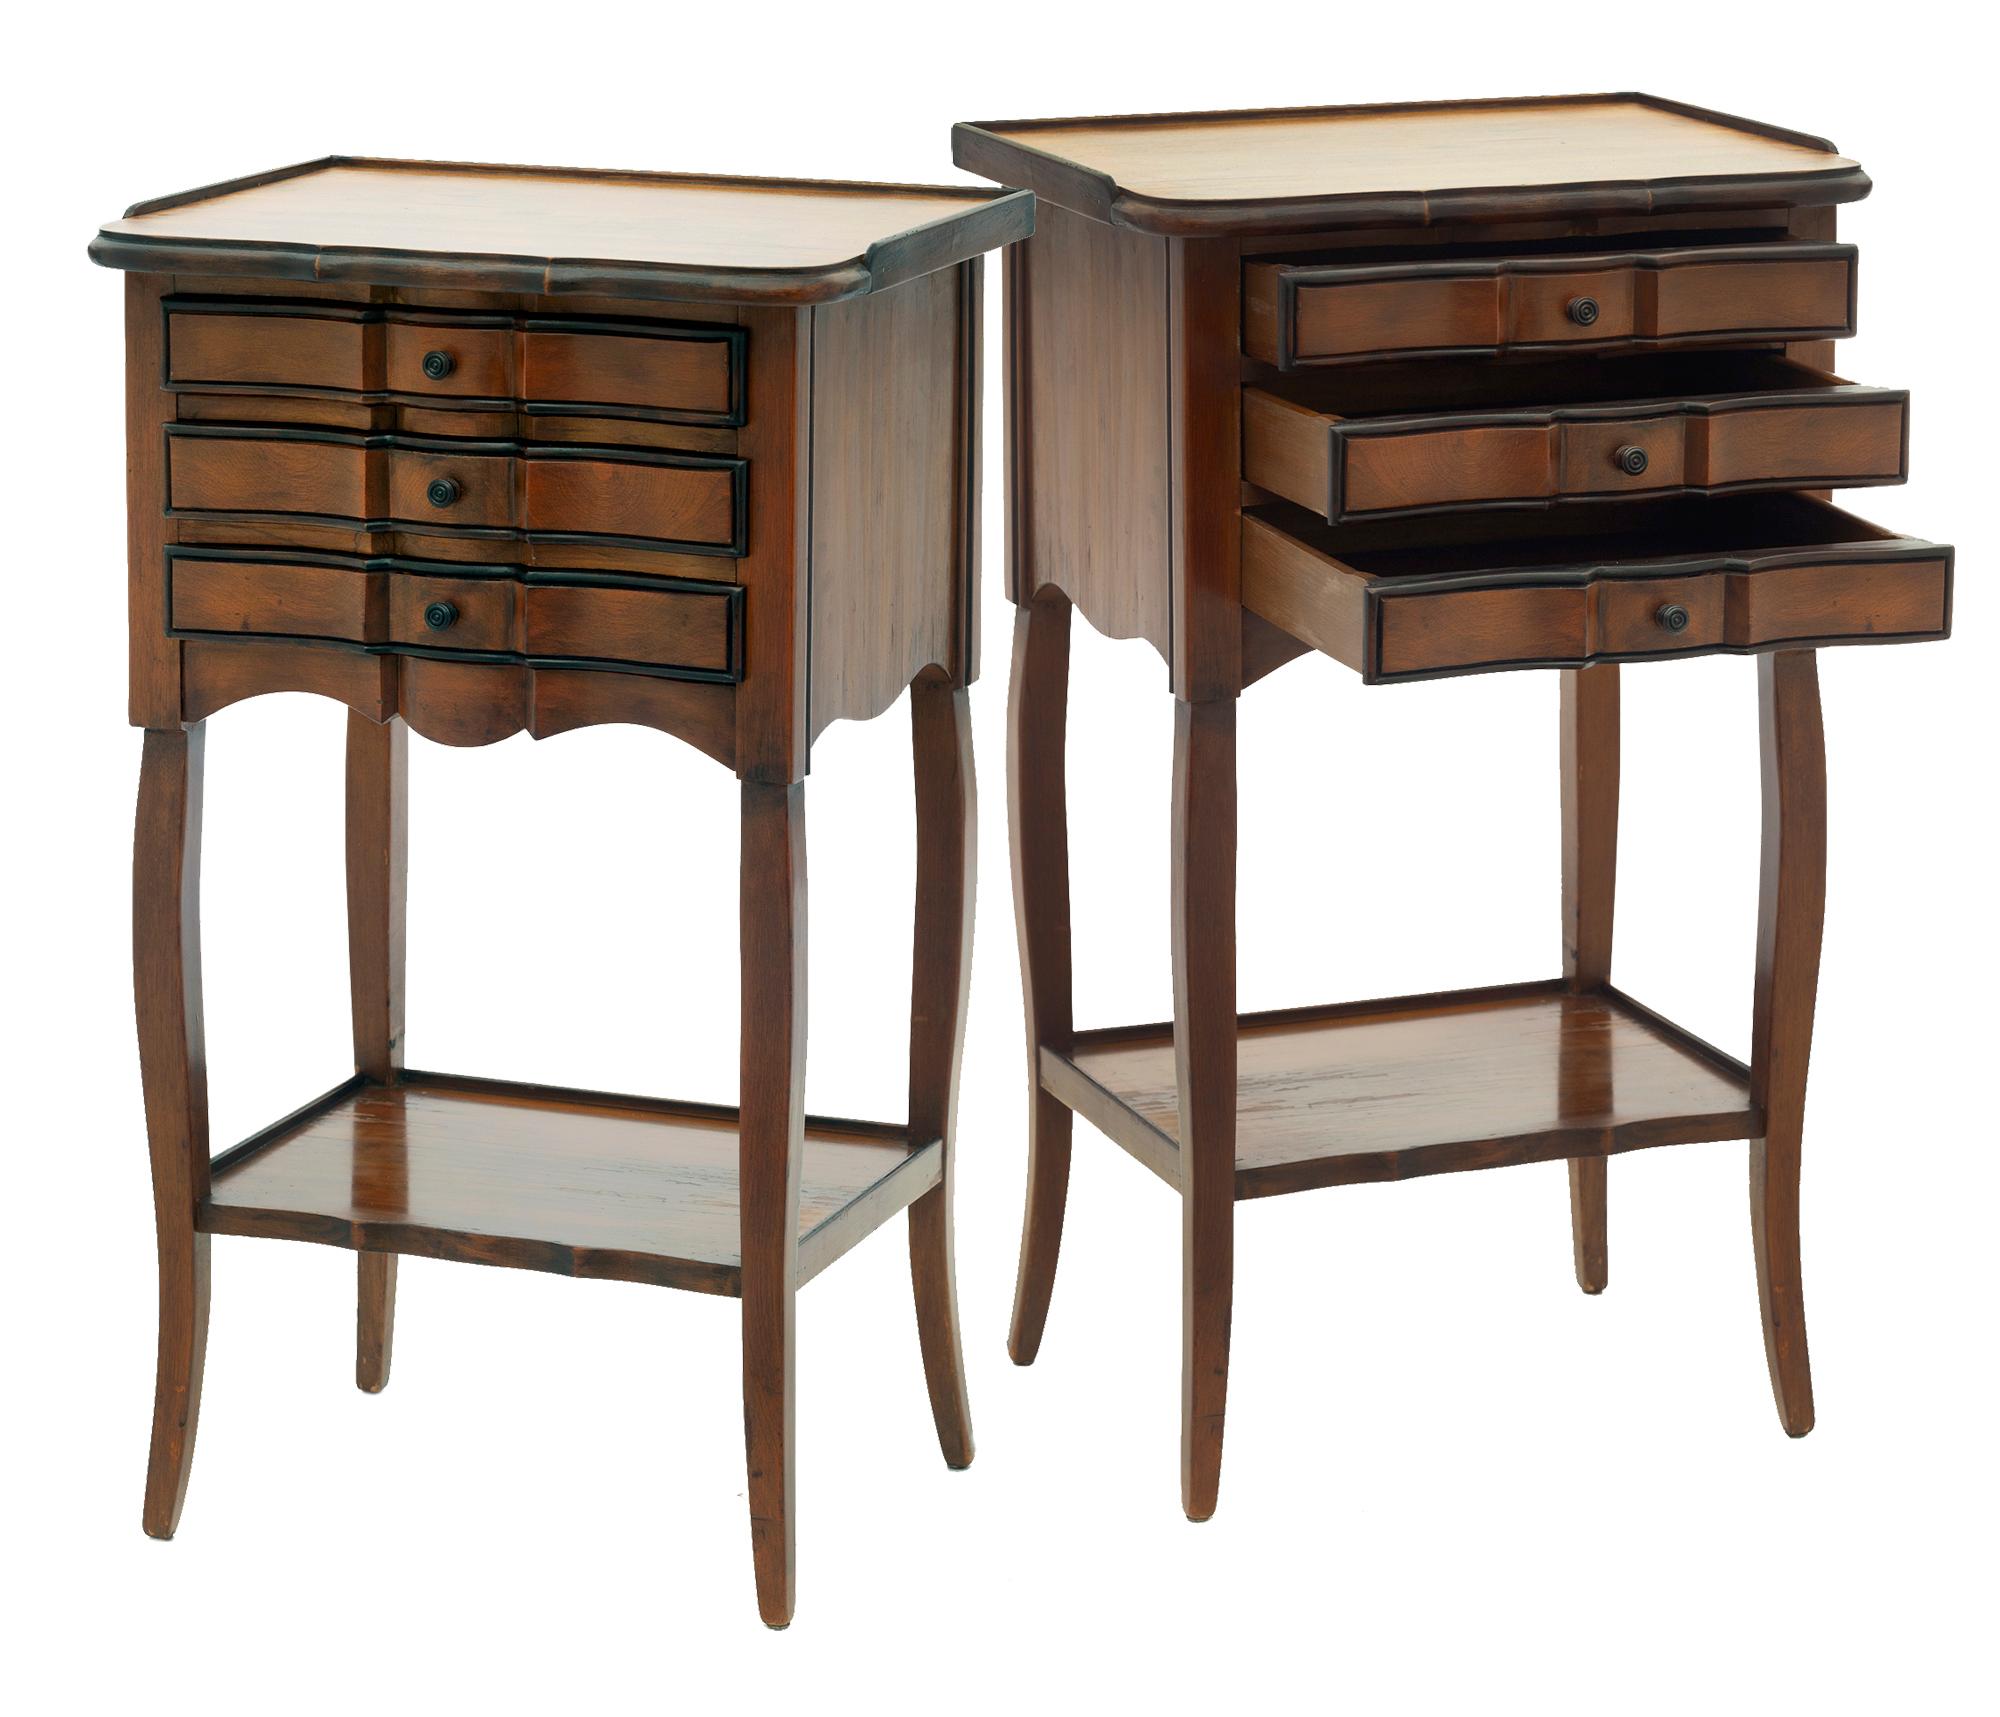 Charming petite commodes/nightstands featuring serpentine drawers with small wooden knobs. A raised edge surrounding the top on 3 sides. Both tables have a custom-made fitted glass top.
The table is supported on cabriole legs. The apron is scalloped